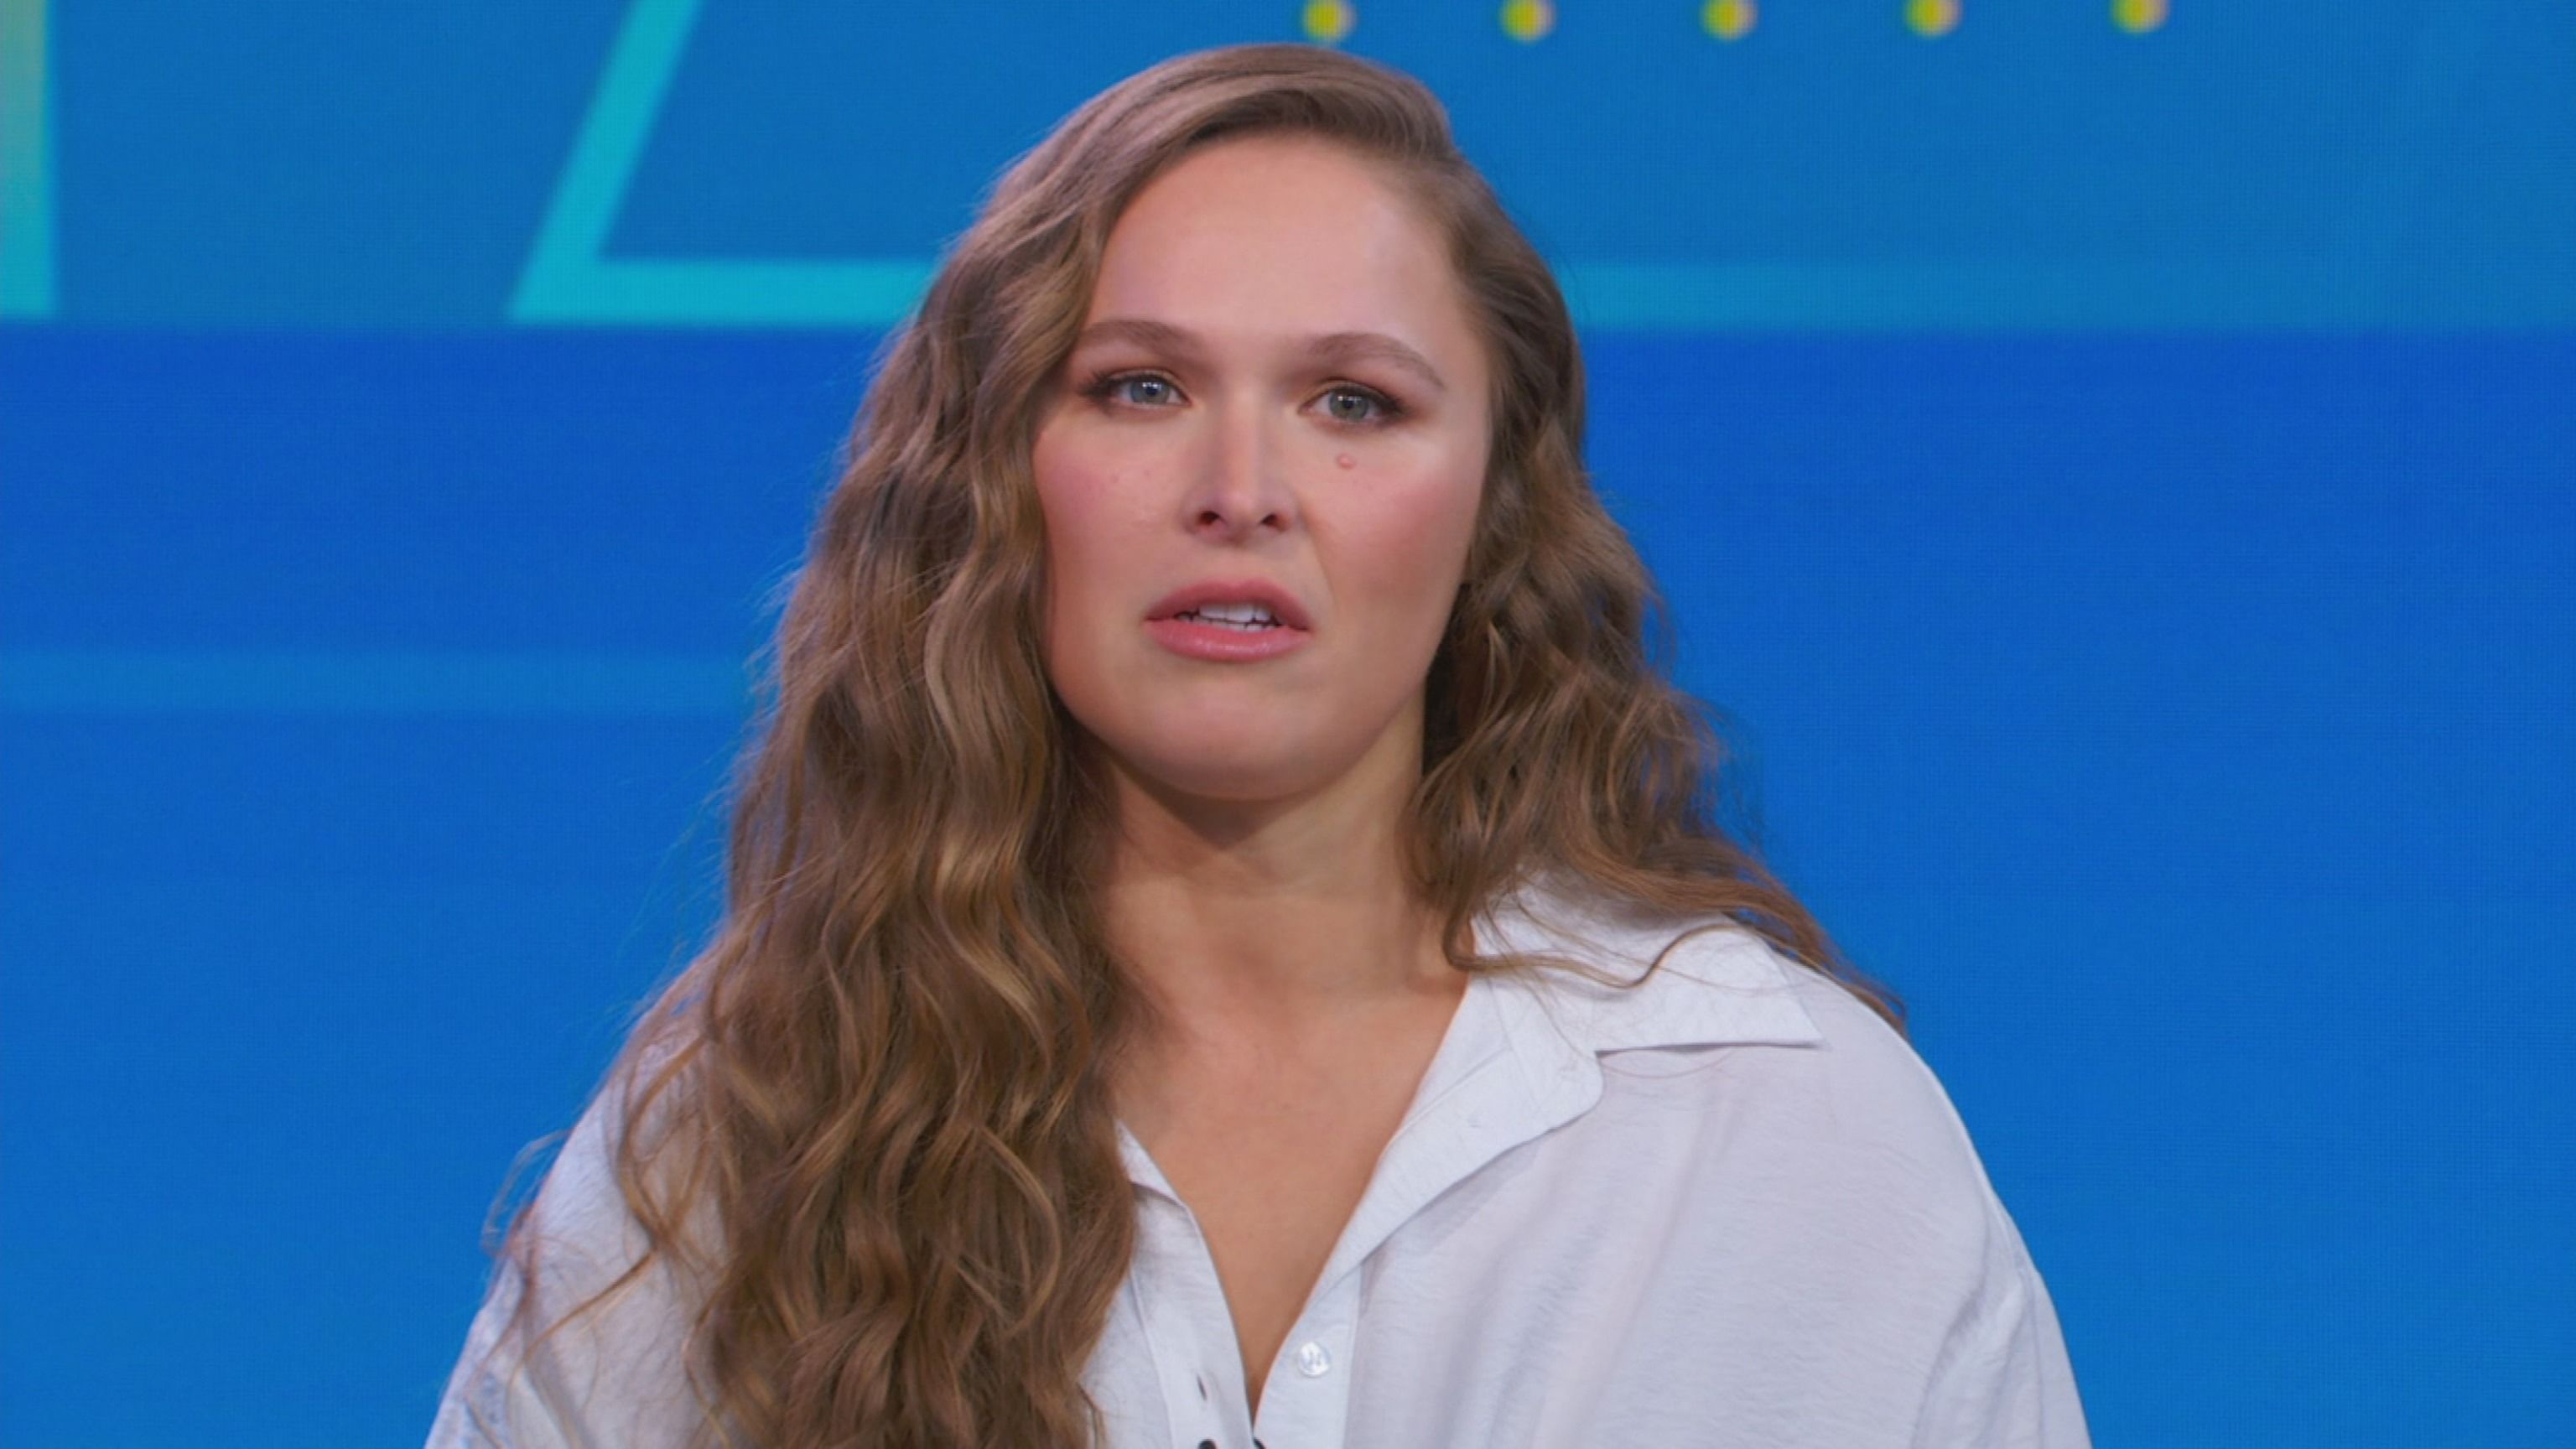 Rousey: I'm The Greatest Fighter That Has Ever Lived